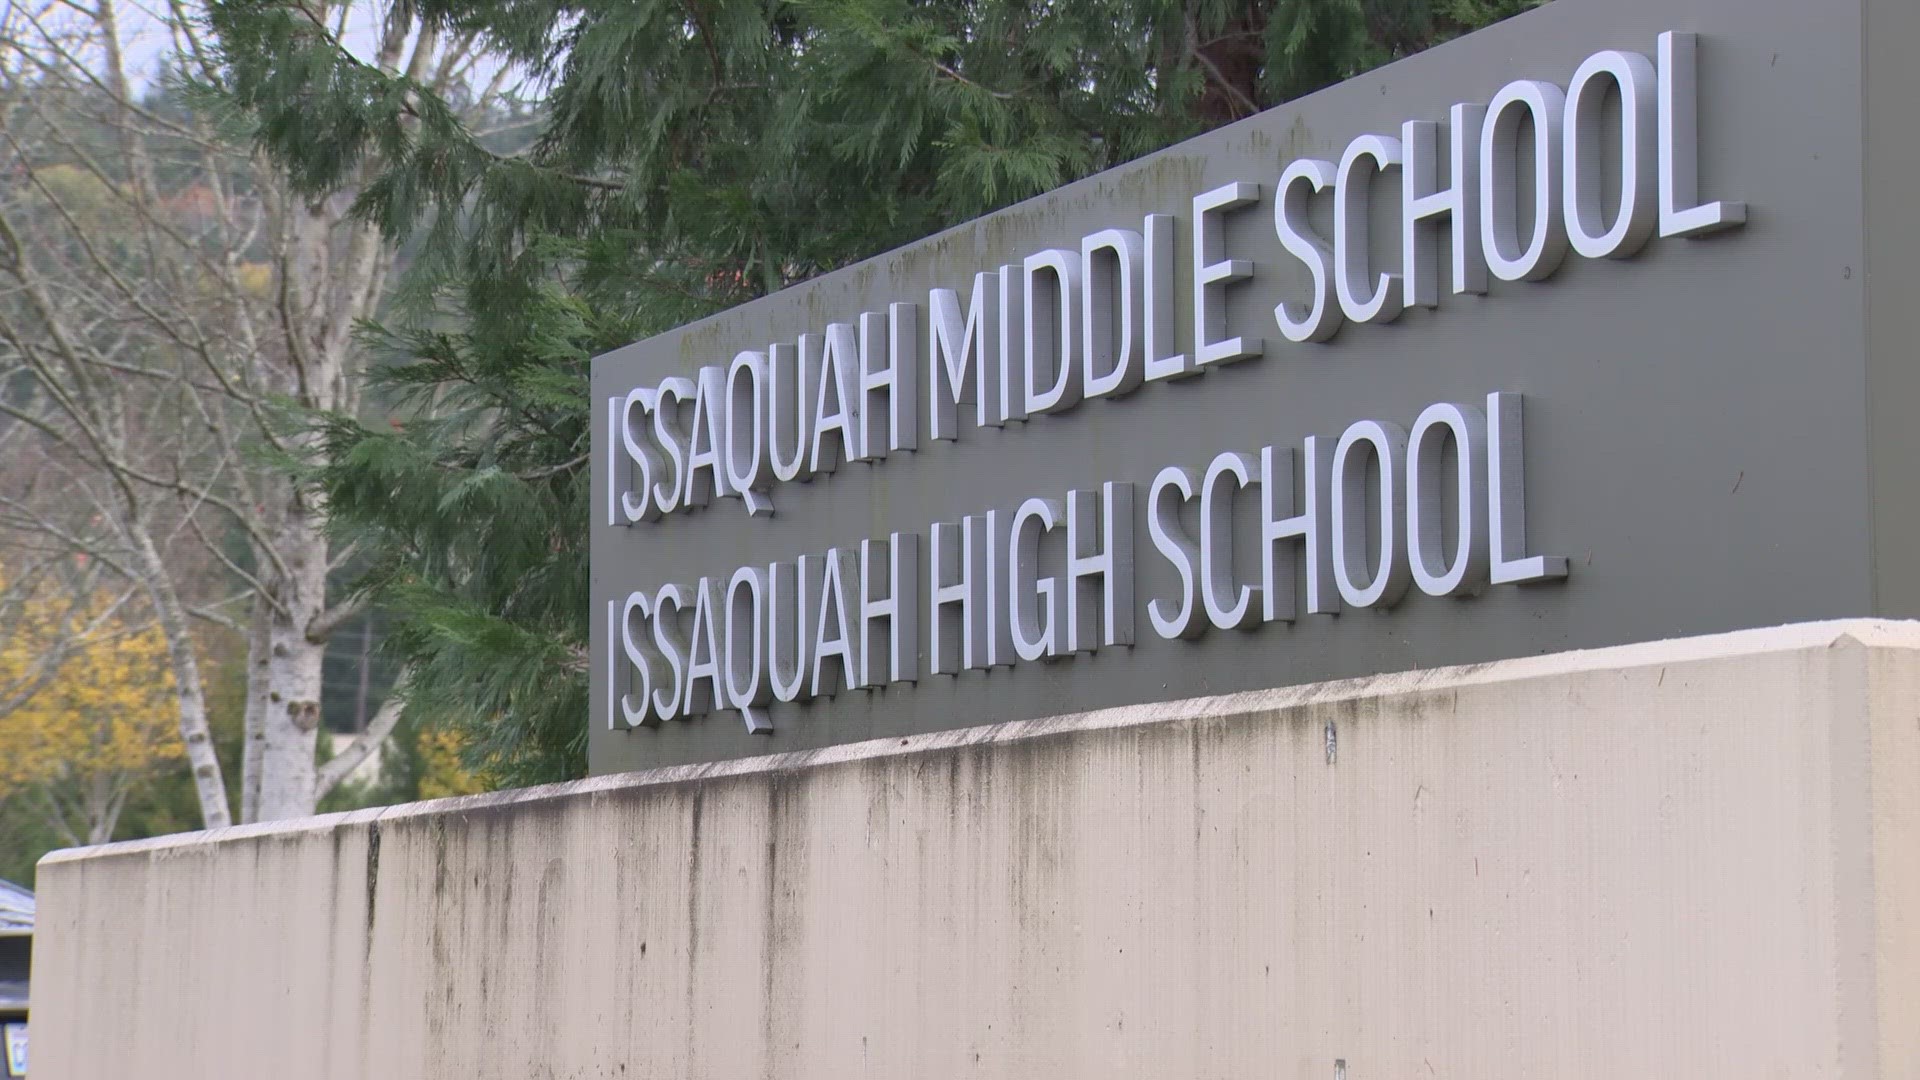 According to the Issaquah School District, the images began circulating around mid-October.